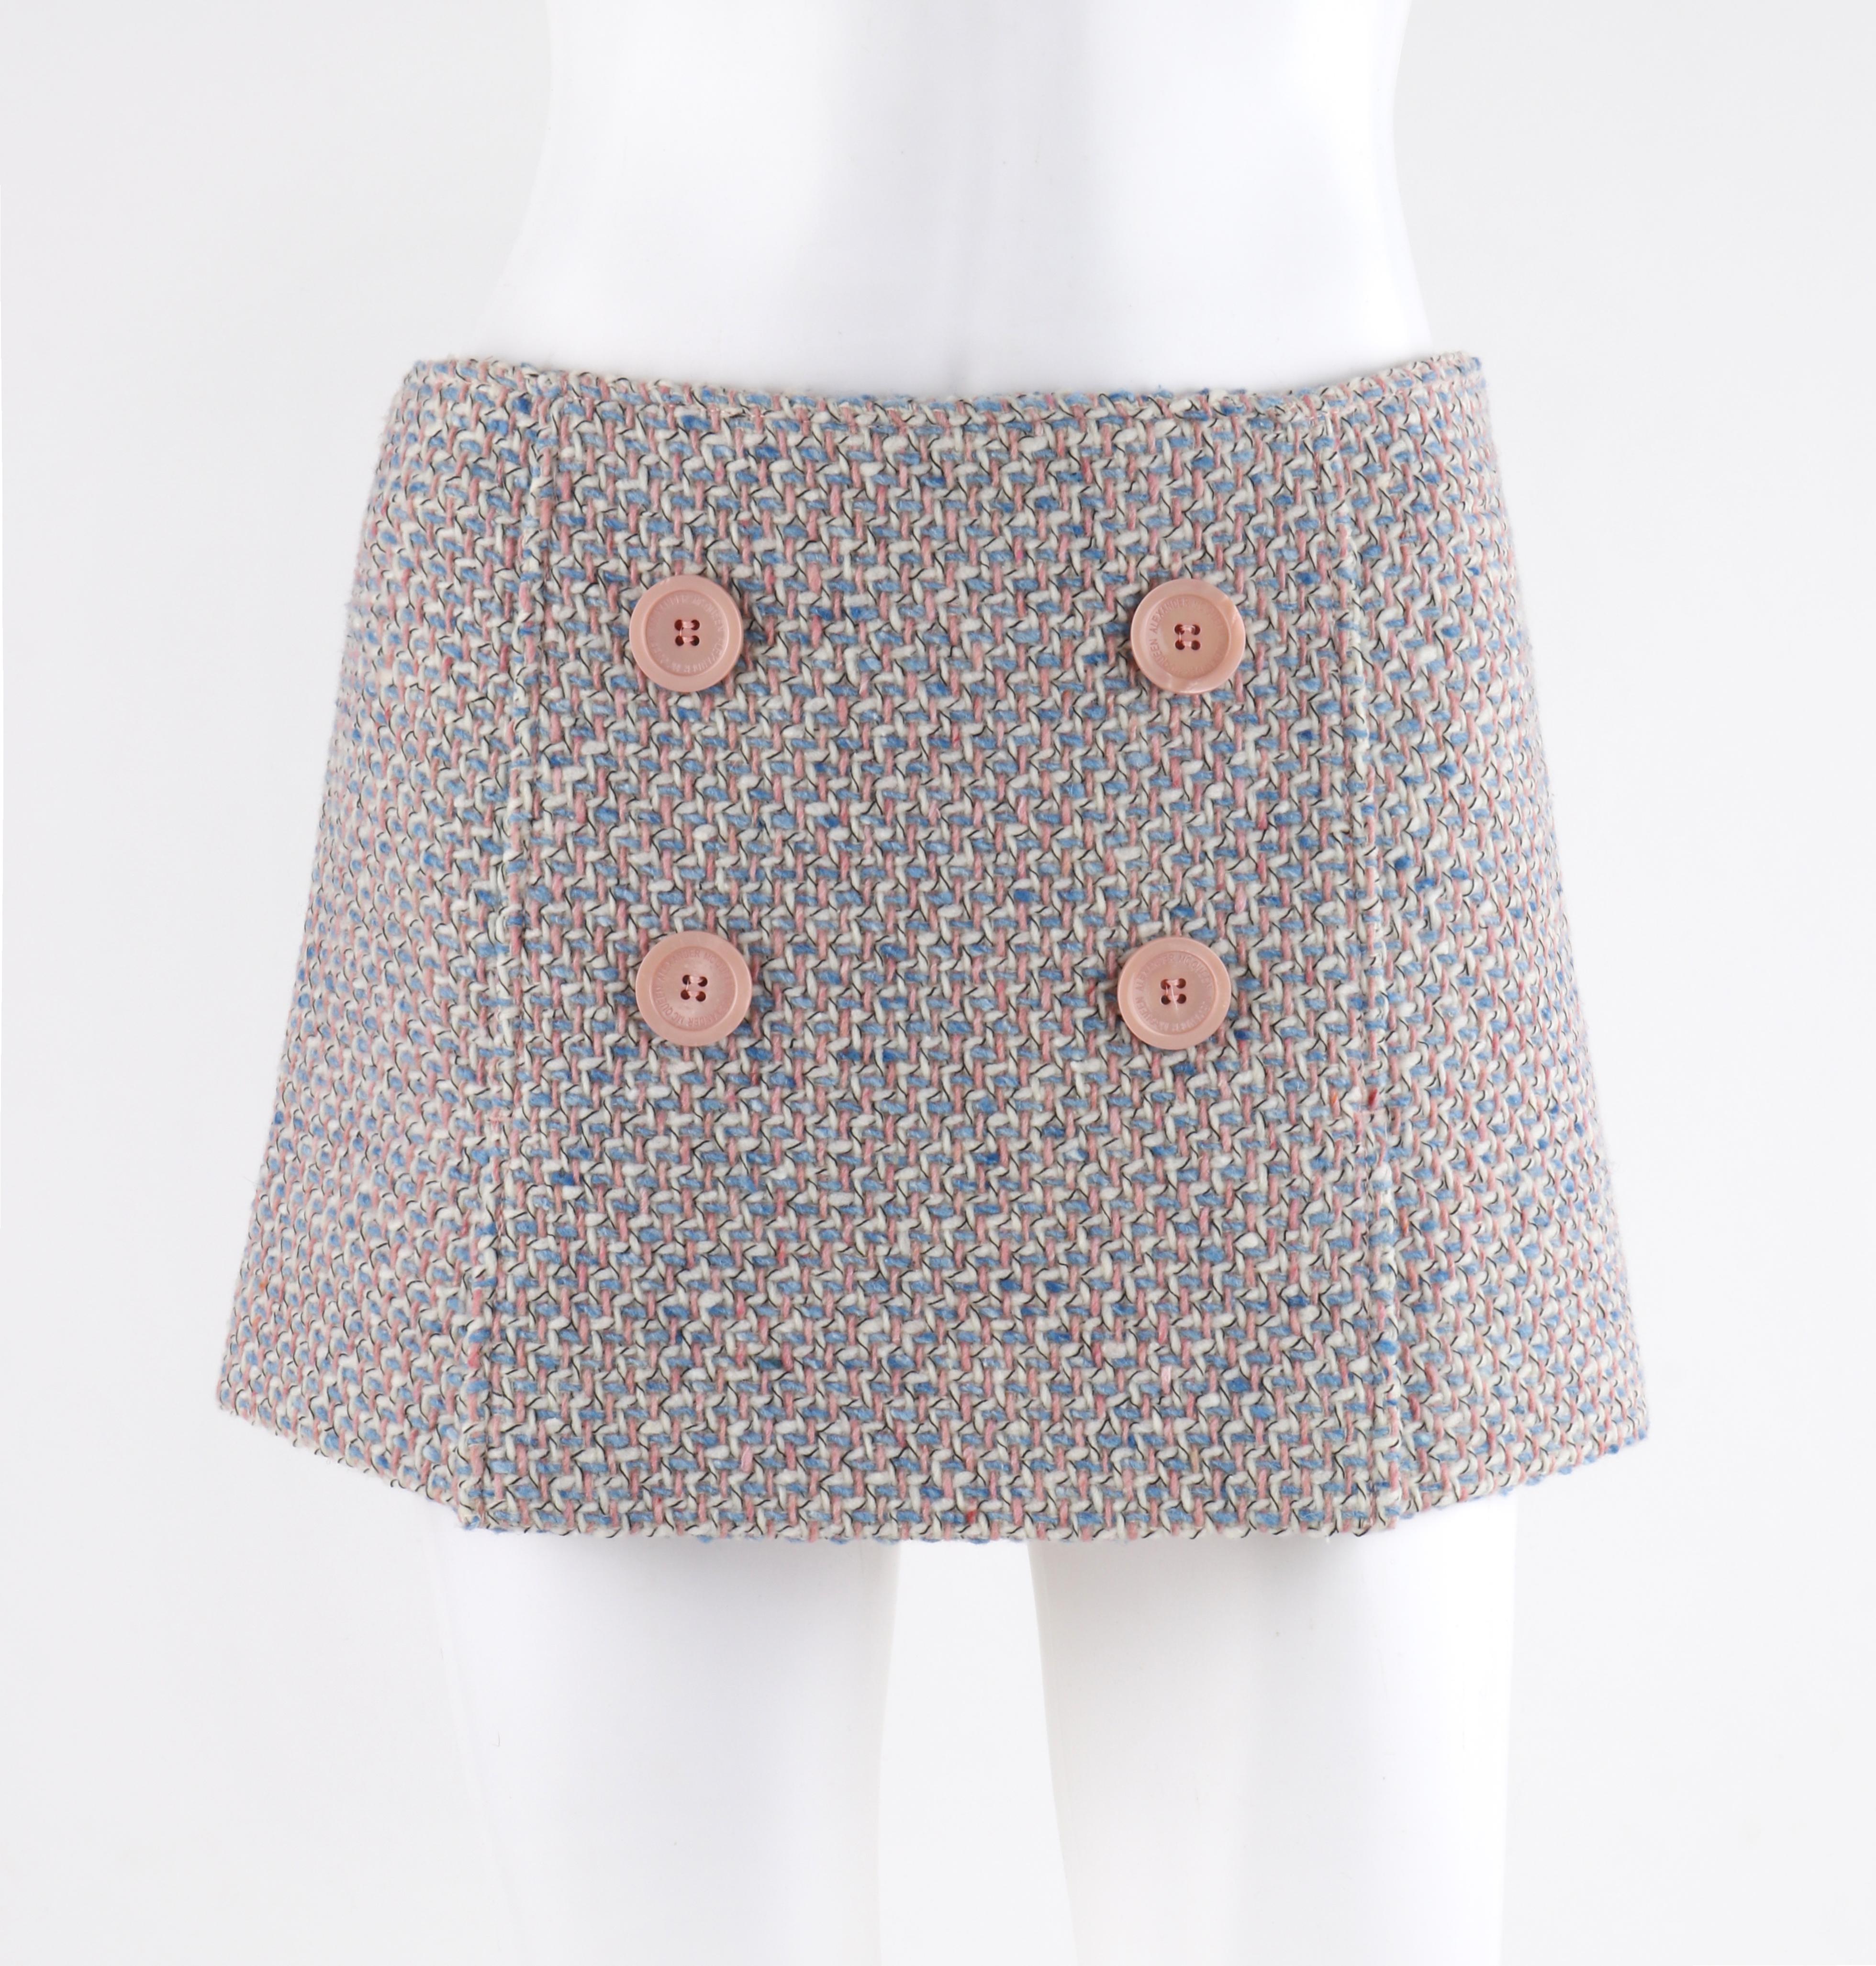 ALEXANDER McQUEEN c.1996 Pink Blue Boucle Tweed Blazer Jacket Mini Skirt Set NWT In Good Condition For Sale In Thiensville, WI